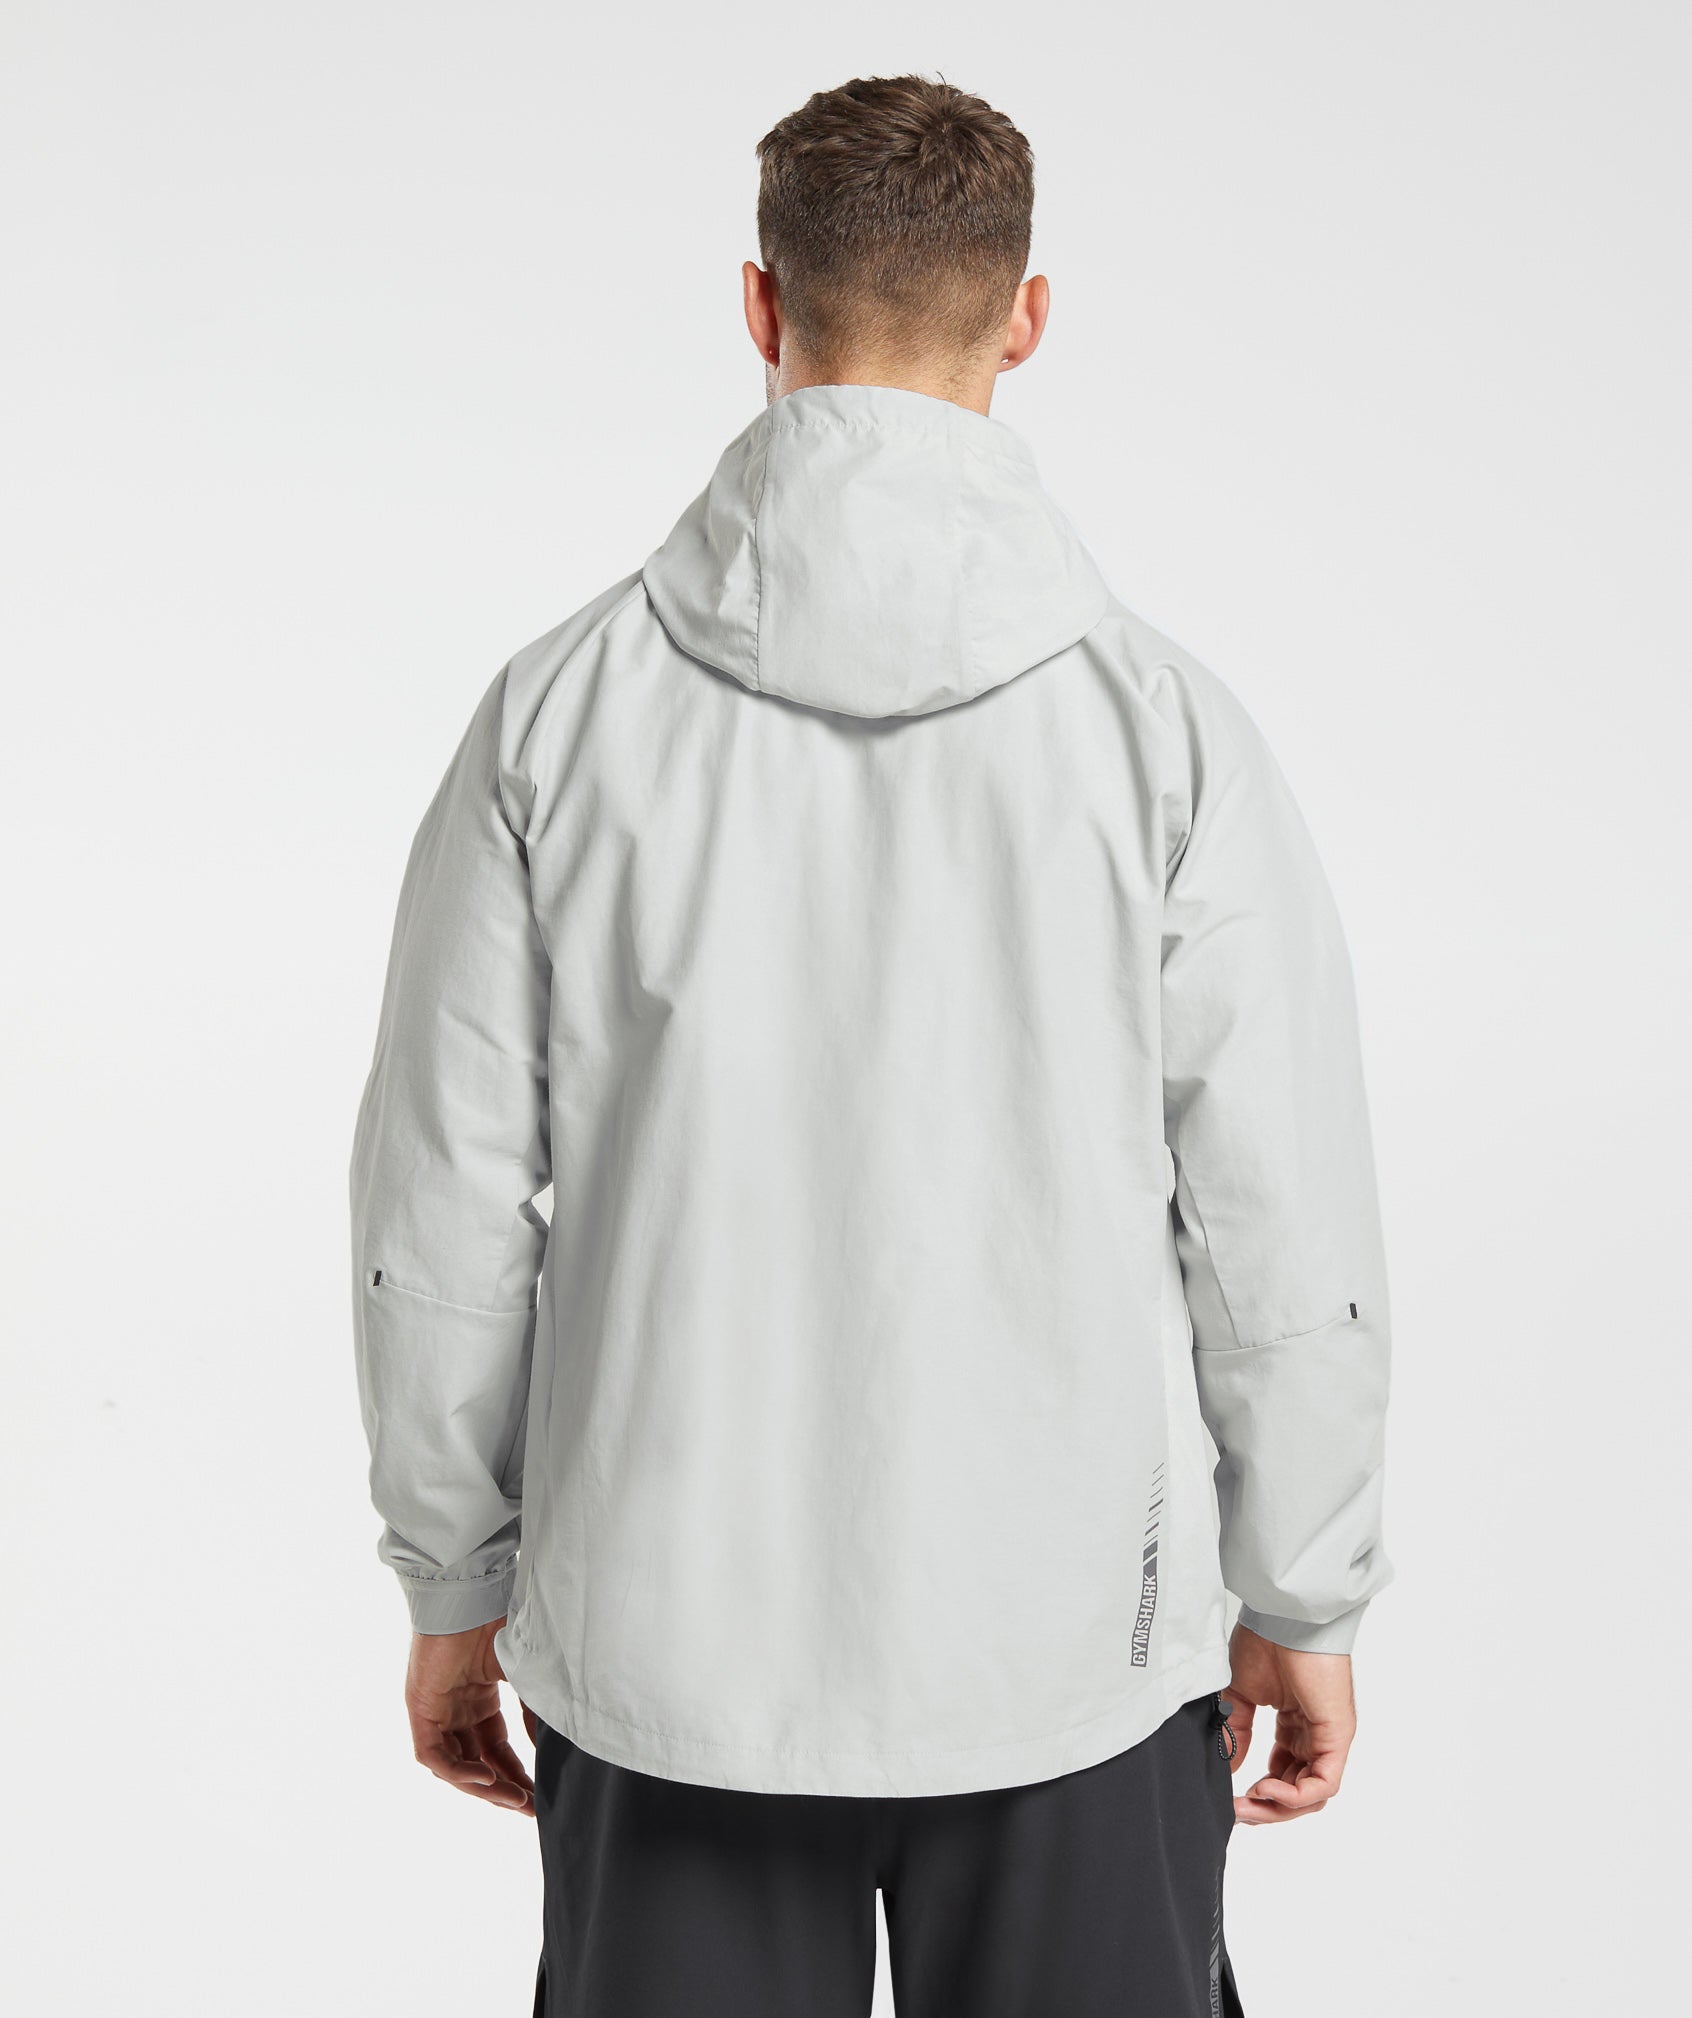 Apex Jacket in Light Grey - view 2